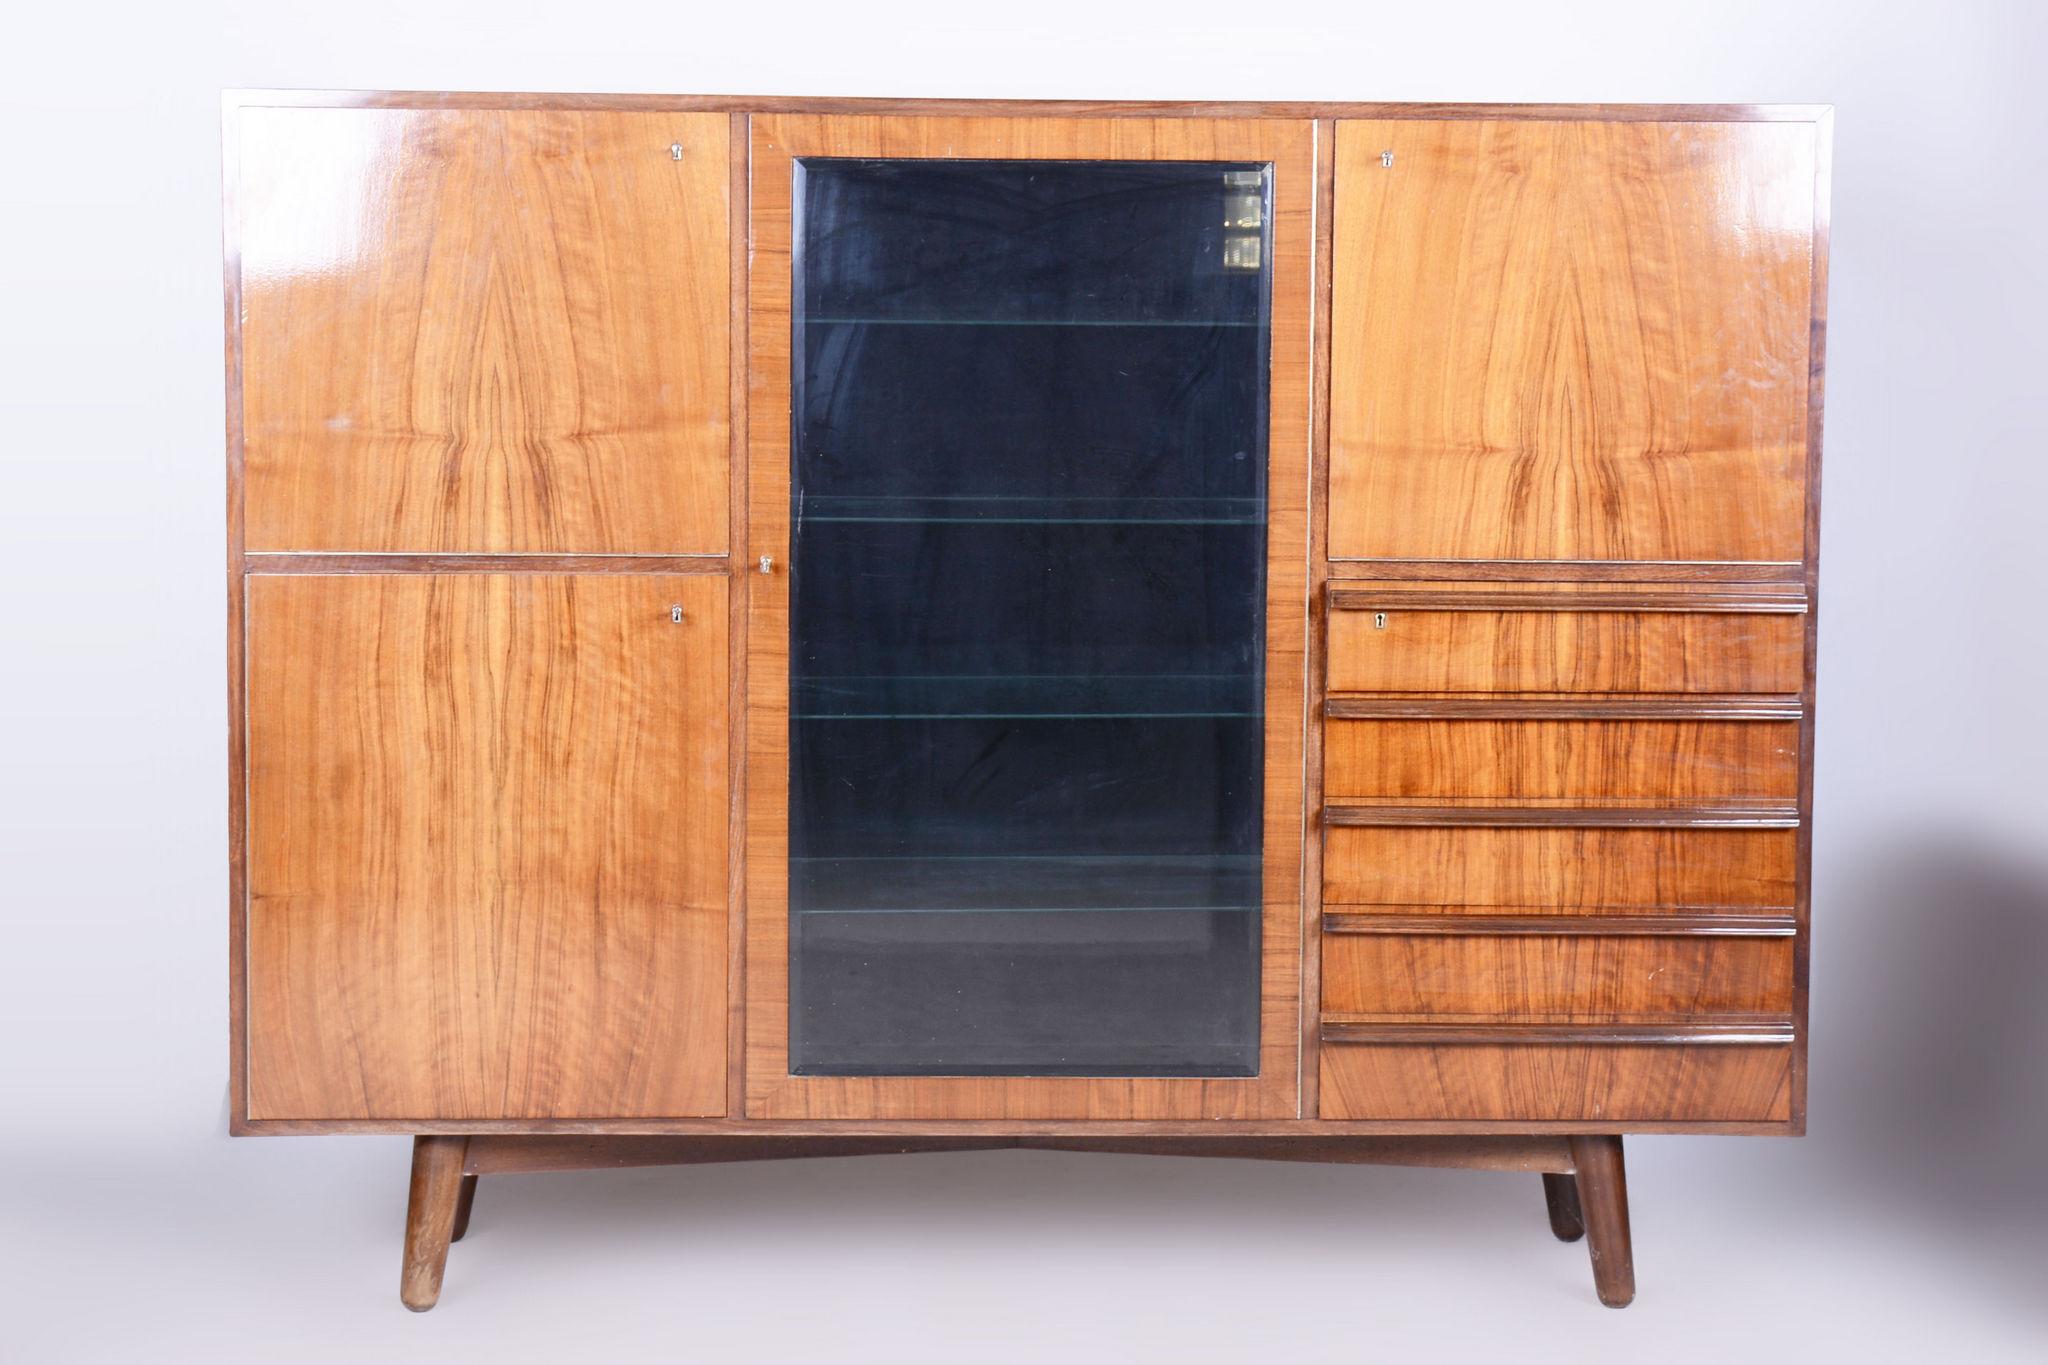 Art Deco bookcase sideboard

Material: Walnut
Period: 1940-1949
Origin: Czech

It has been re-polished with polyutherane piano lacquer by our professional refurbishing team in Czechia according to the original process.								

Our professional